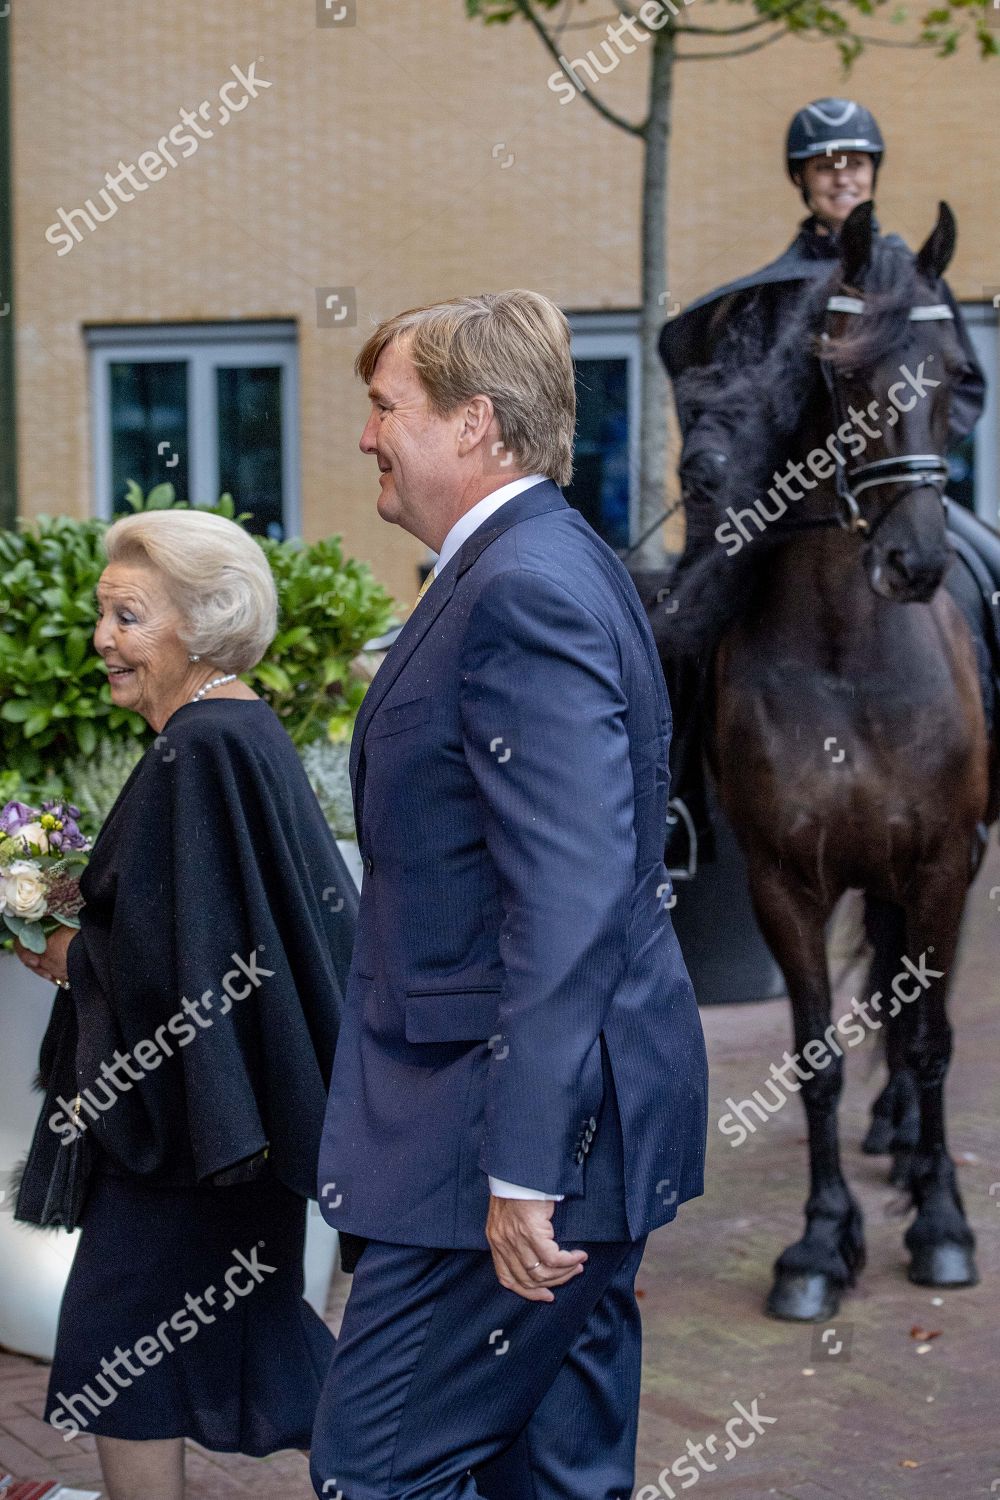 princess-beatrix-and-king-willem-alexander-at-the-premiere-of-theater-production-de-stormruiter-leeuwarde-the-netherlands-shutterstock-editorial-9877562at.jpg